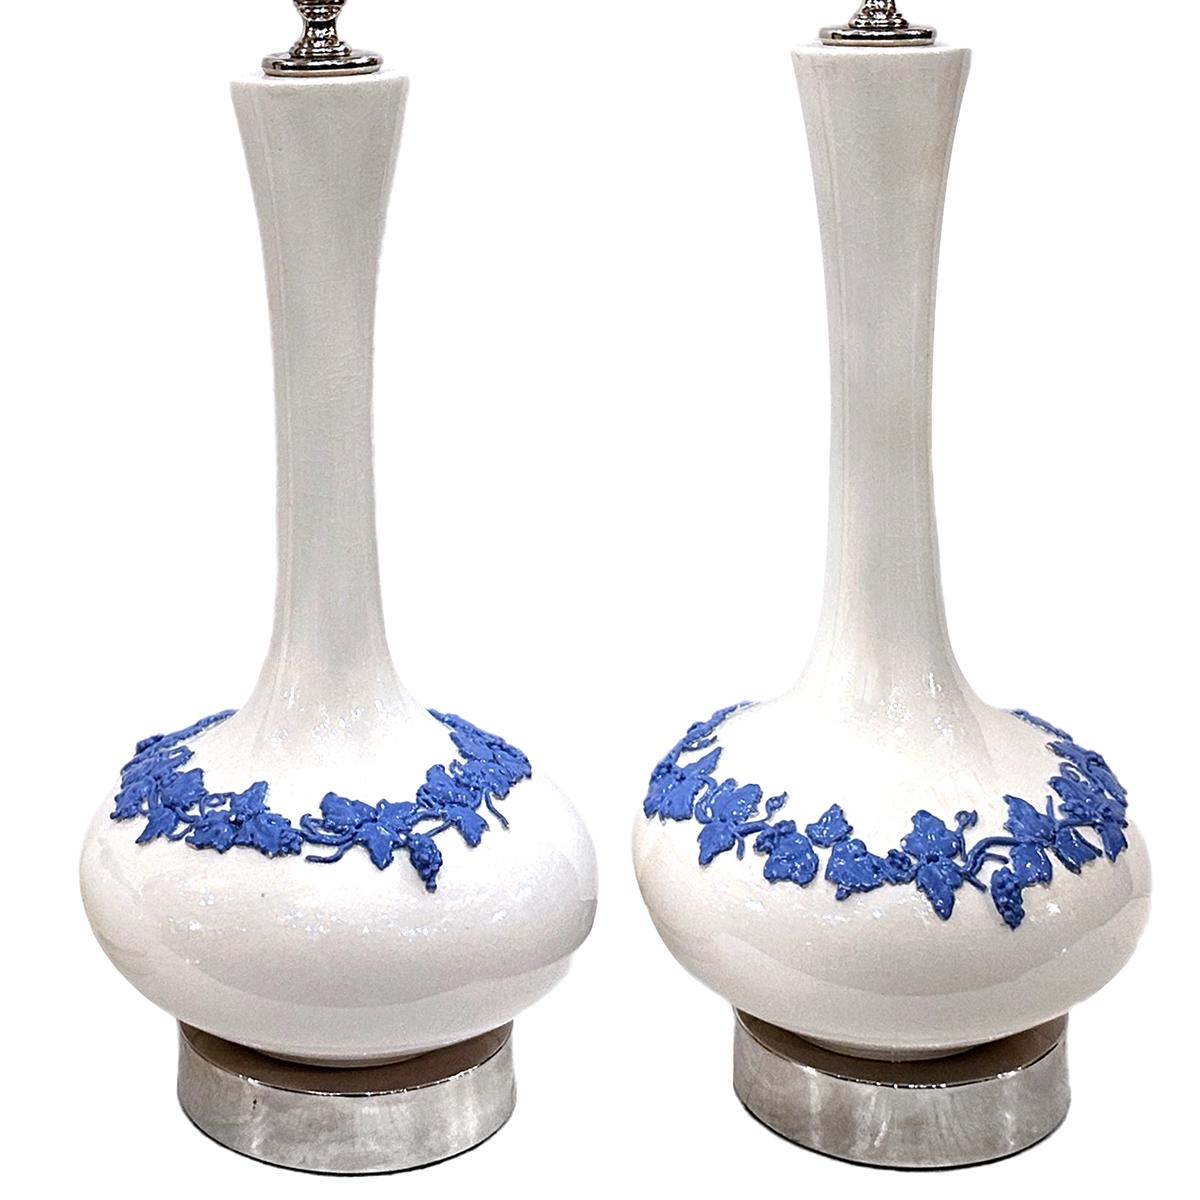 Pair of circa 1940's English porcelain table lamps with silver bases.

Measurements:
Height of body: 16